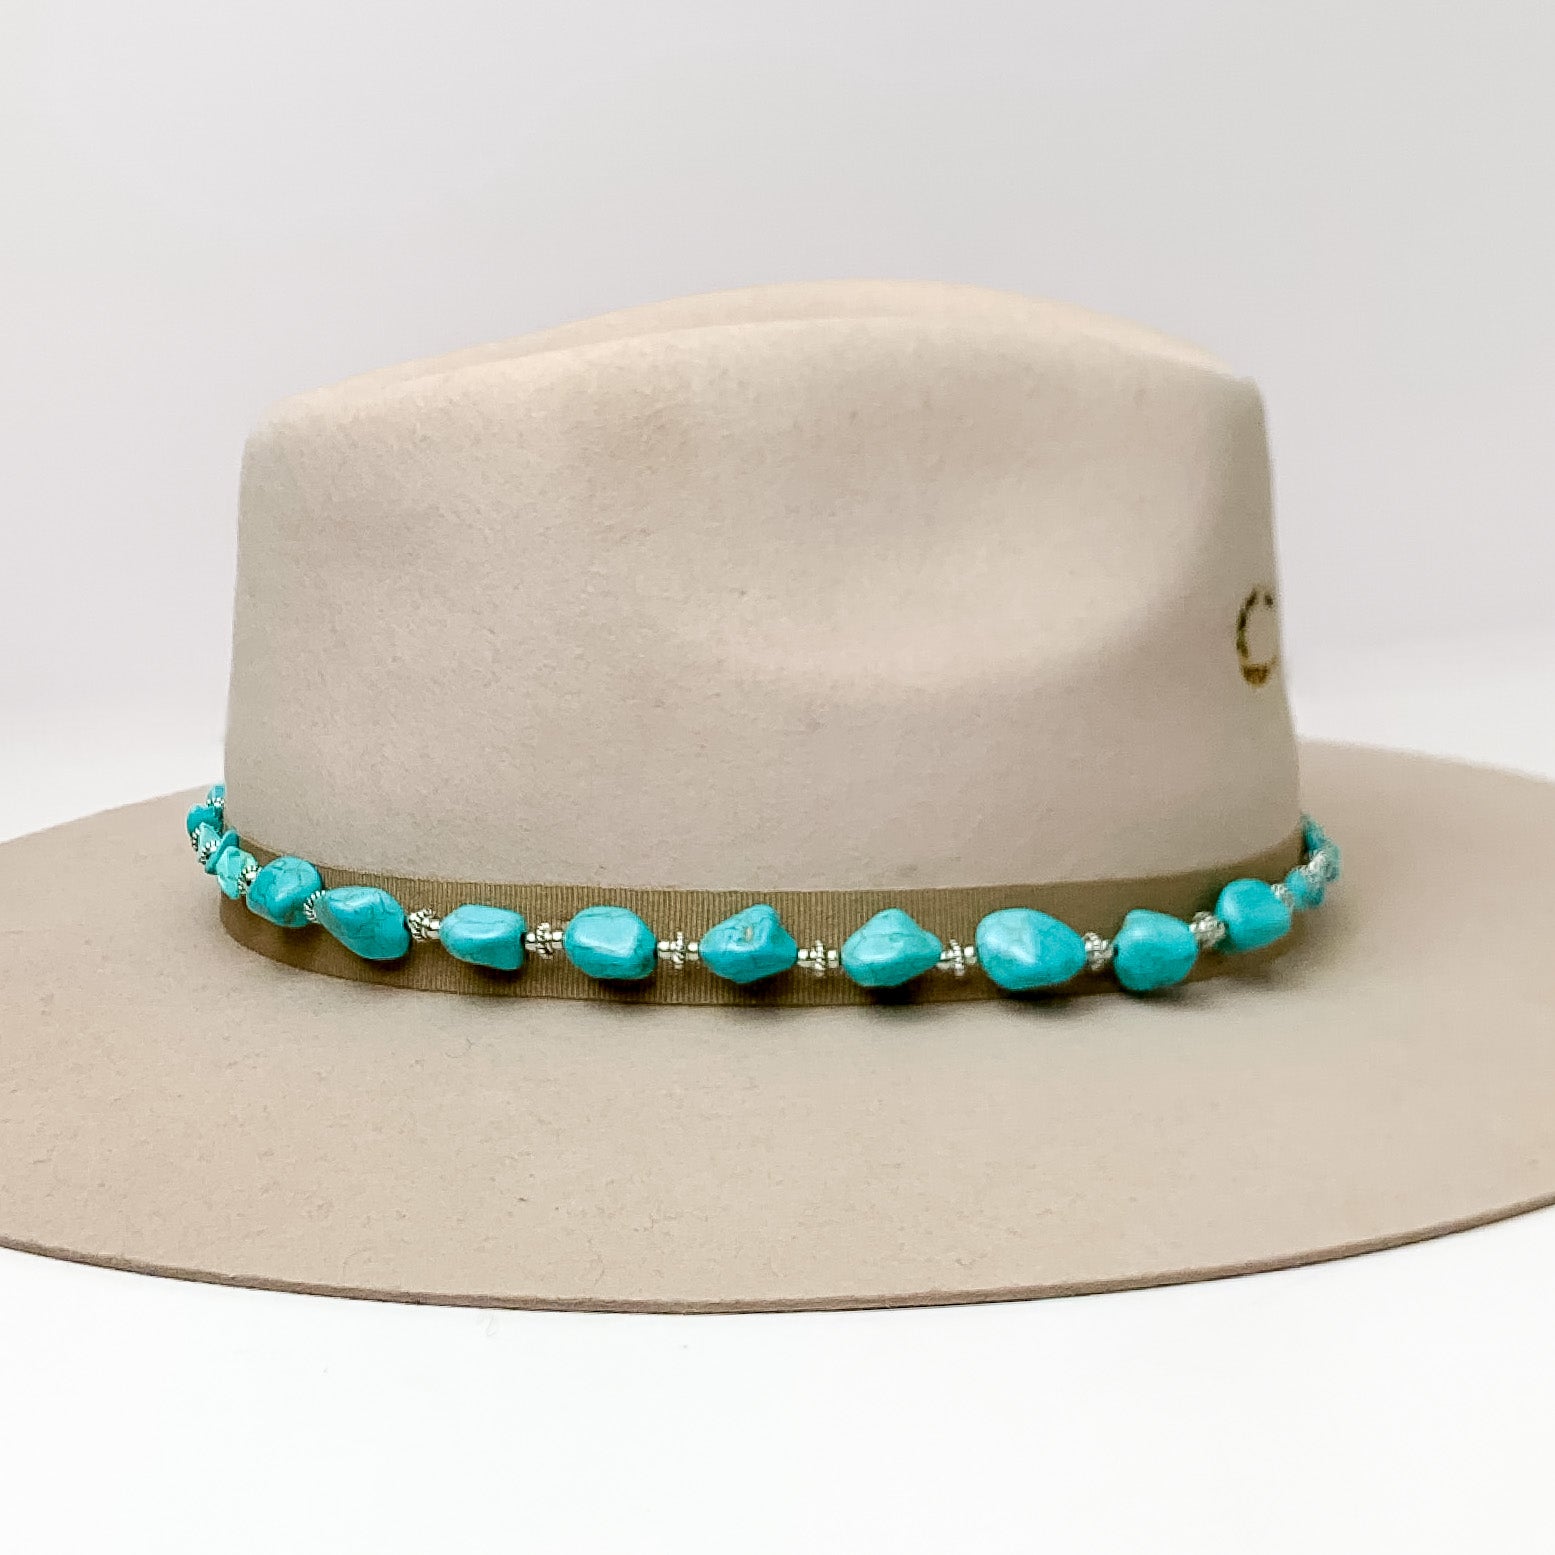 Hat Band With Large Turquoise Stones and Light Brown Ties. Pictured on a light brown hat with a white background.